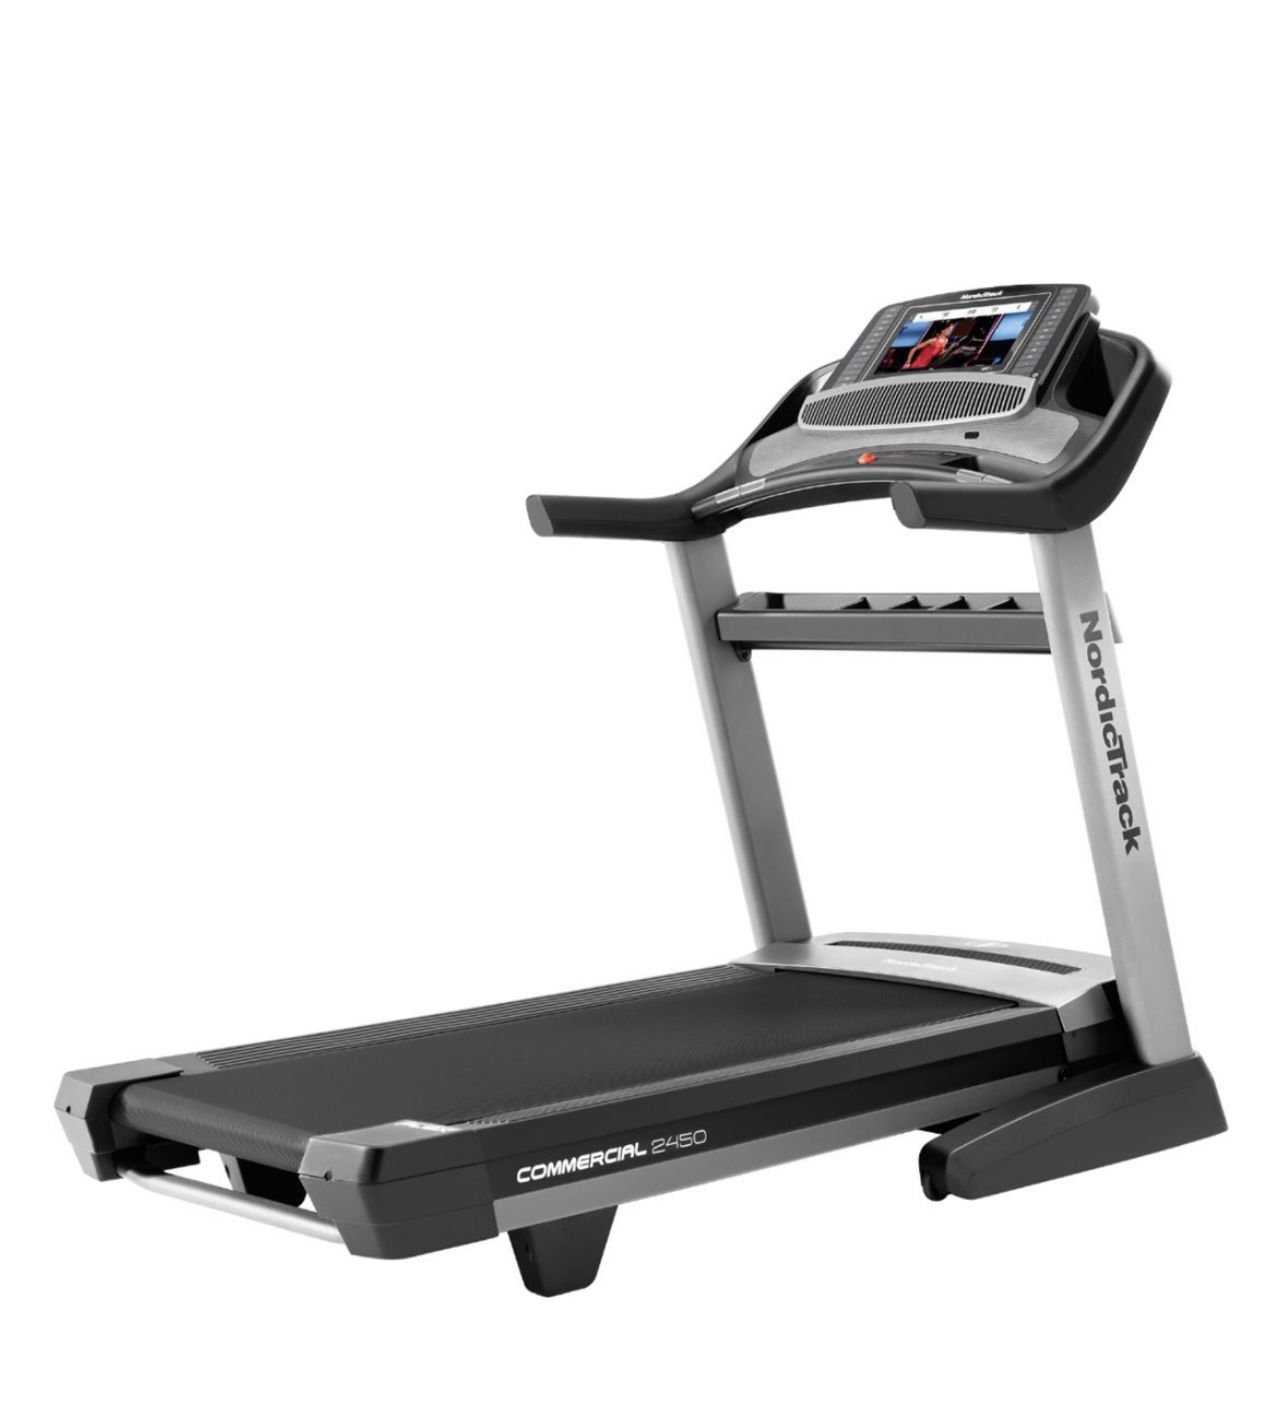 Nordictrack 2450 Commercial Treadmill. Like New!